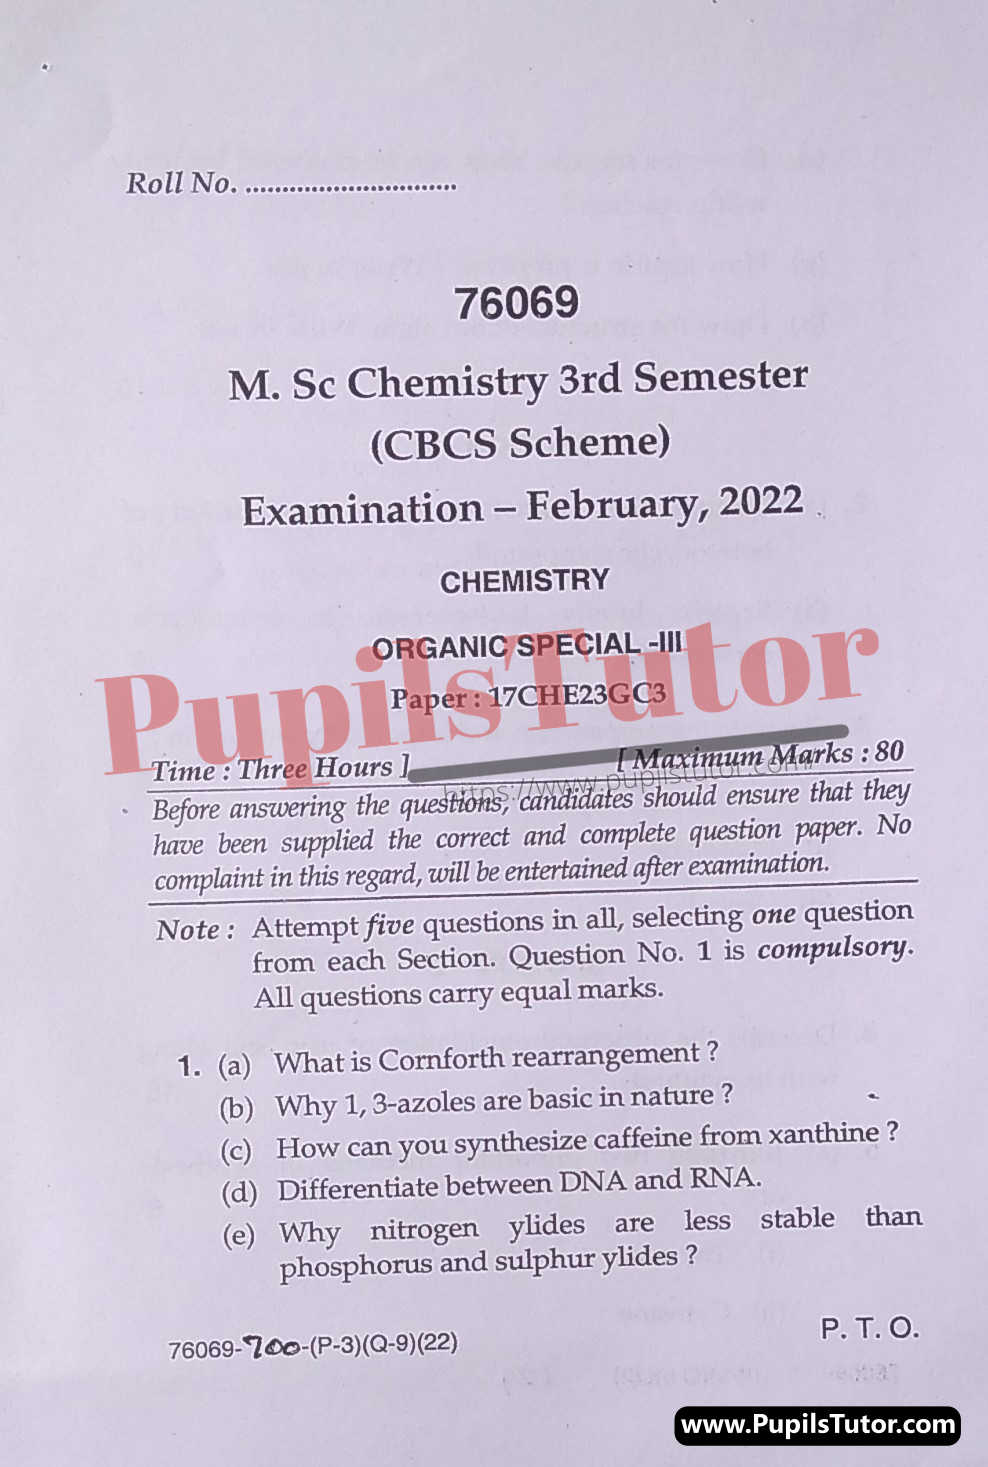 MDU (Maharshi Dayanand University, Rohtak Haryana) MSc Chemistry CBCS Scheme Third Semester Previous Year Organic Special-III Question Paper For February, 2022 Exam (Question Paper Page 1) - pupilstutor.com